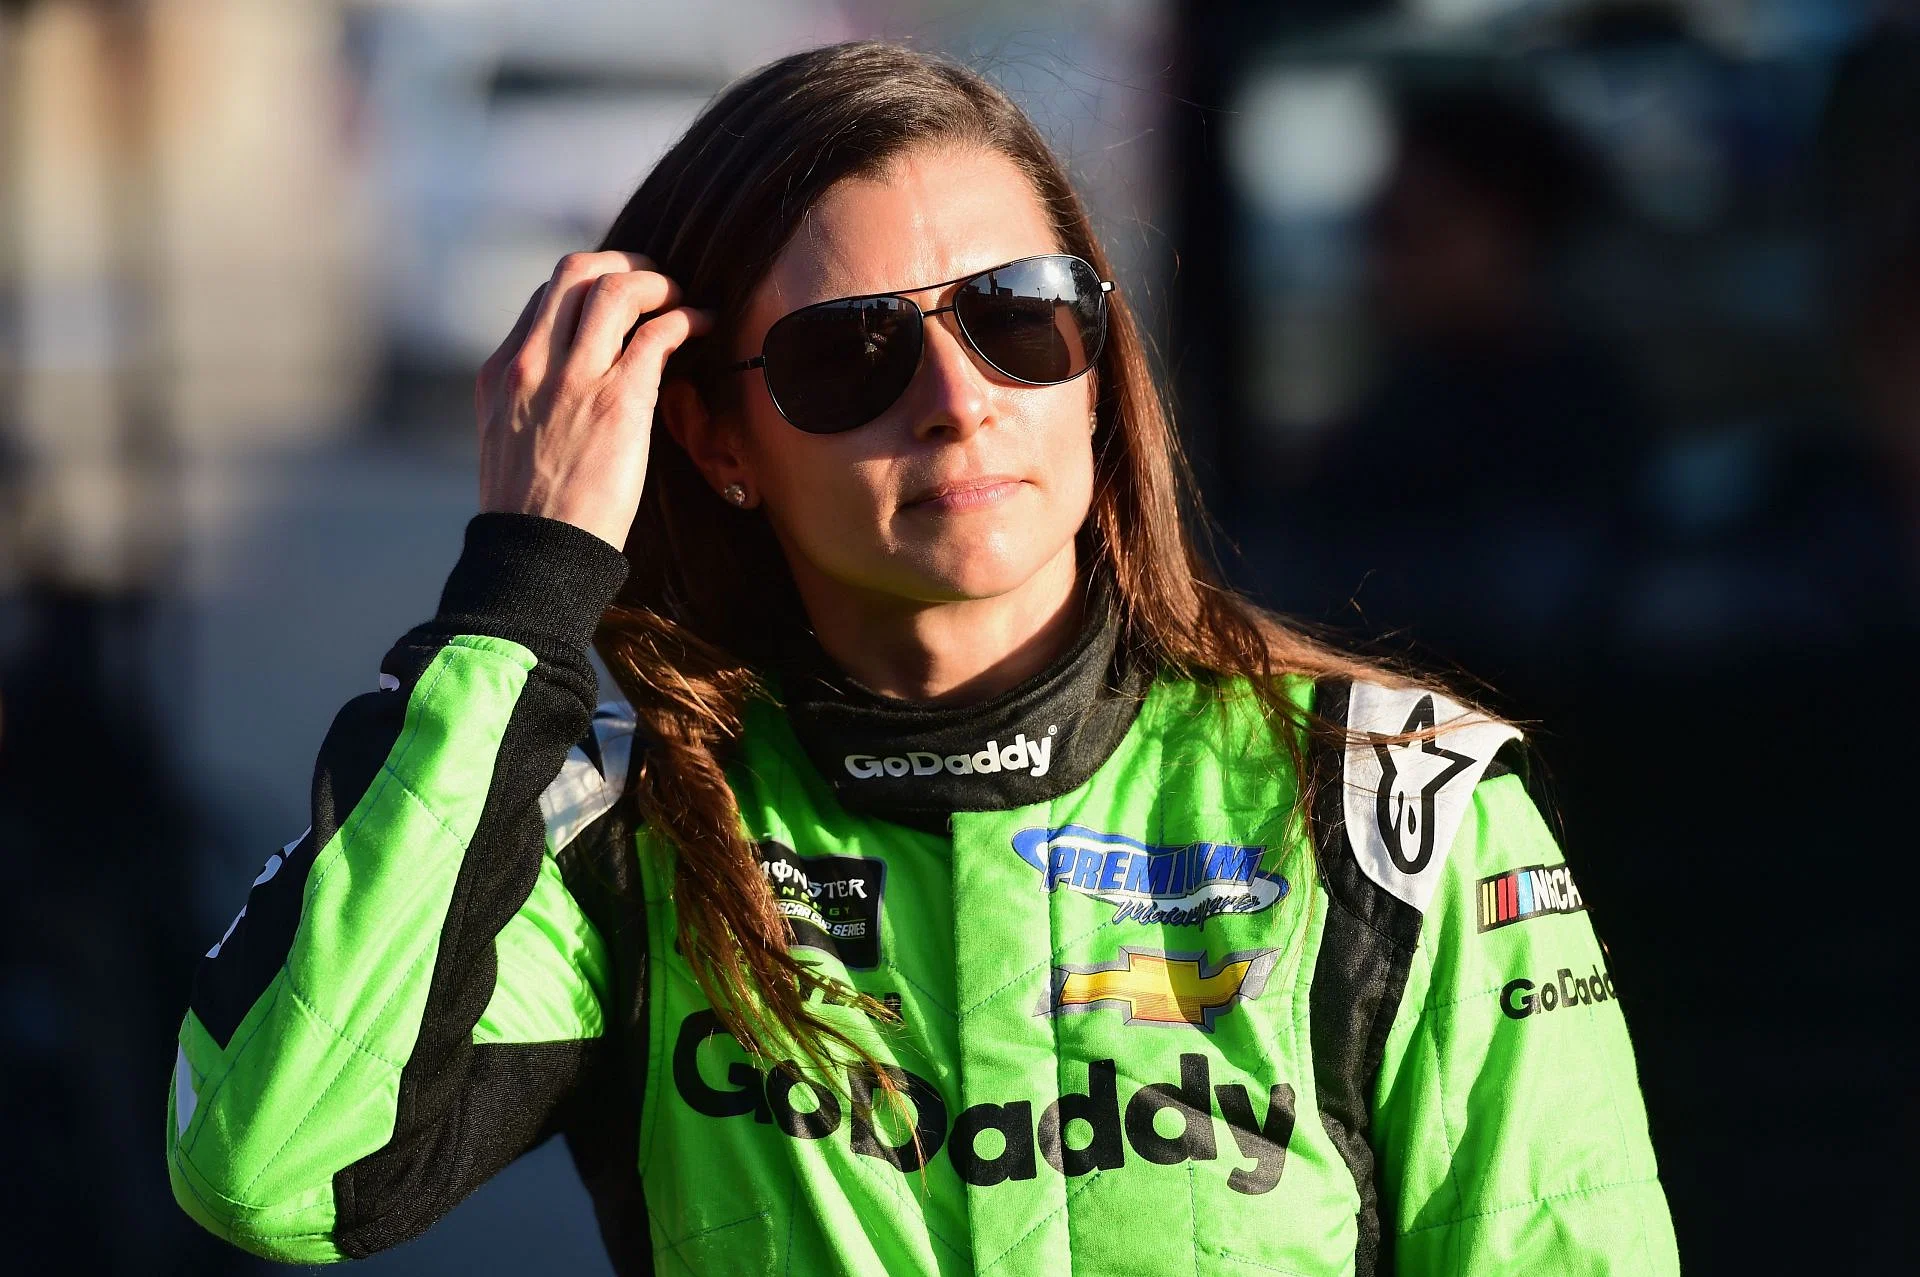 What was the name of the team Danica Patrick drove for in her final Indianapolis 500 appearance?